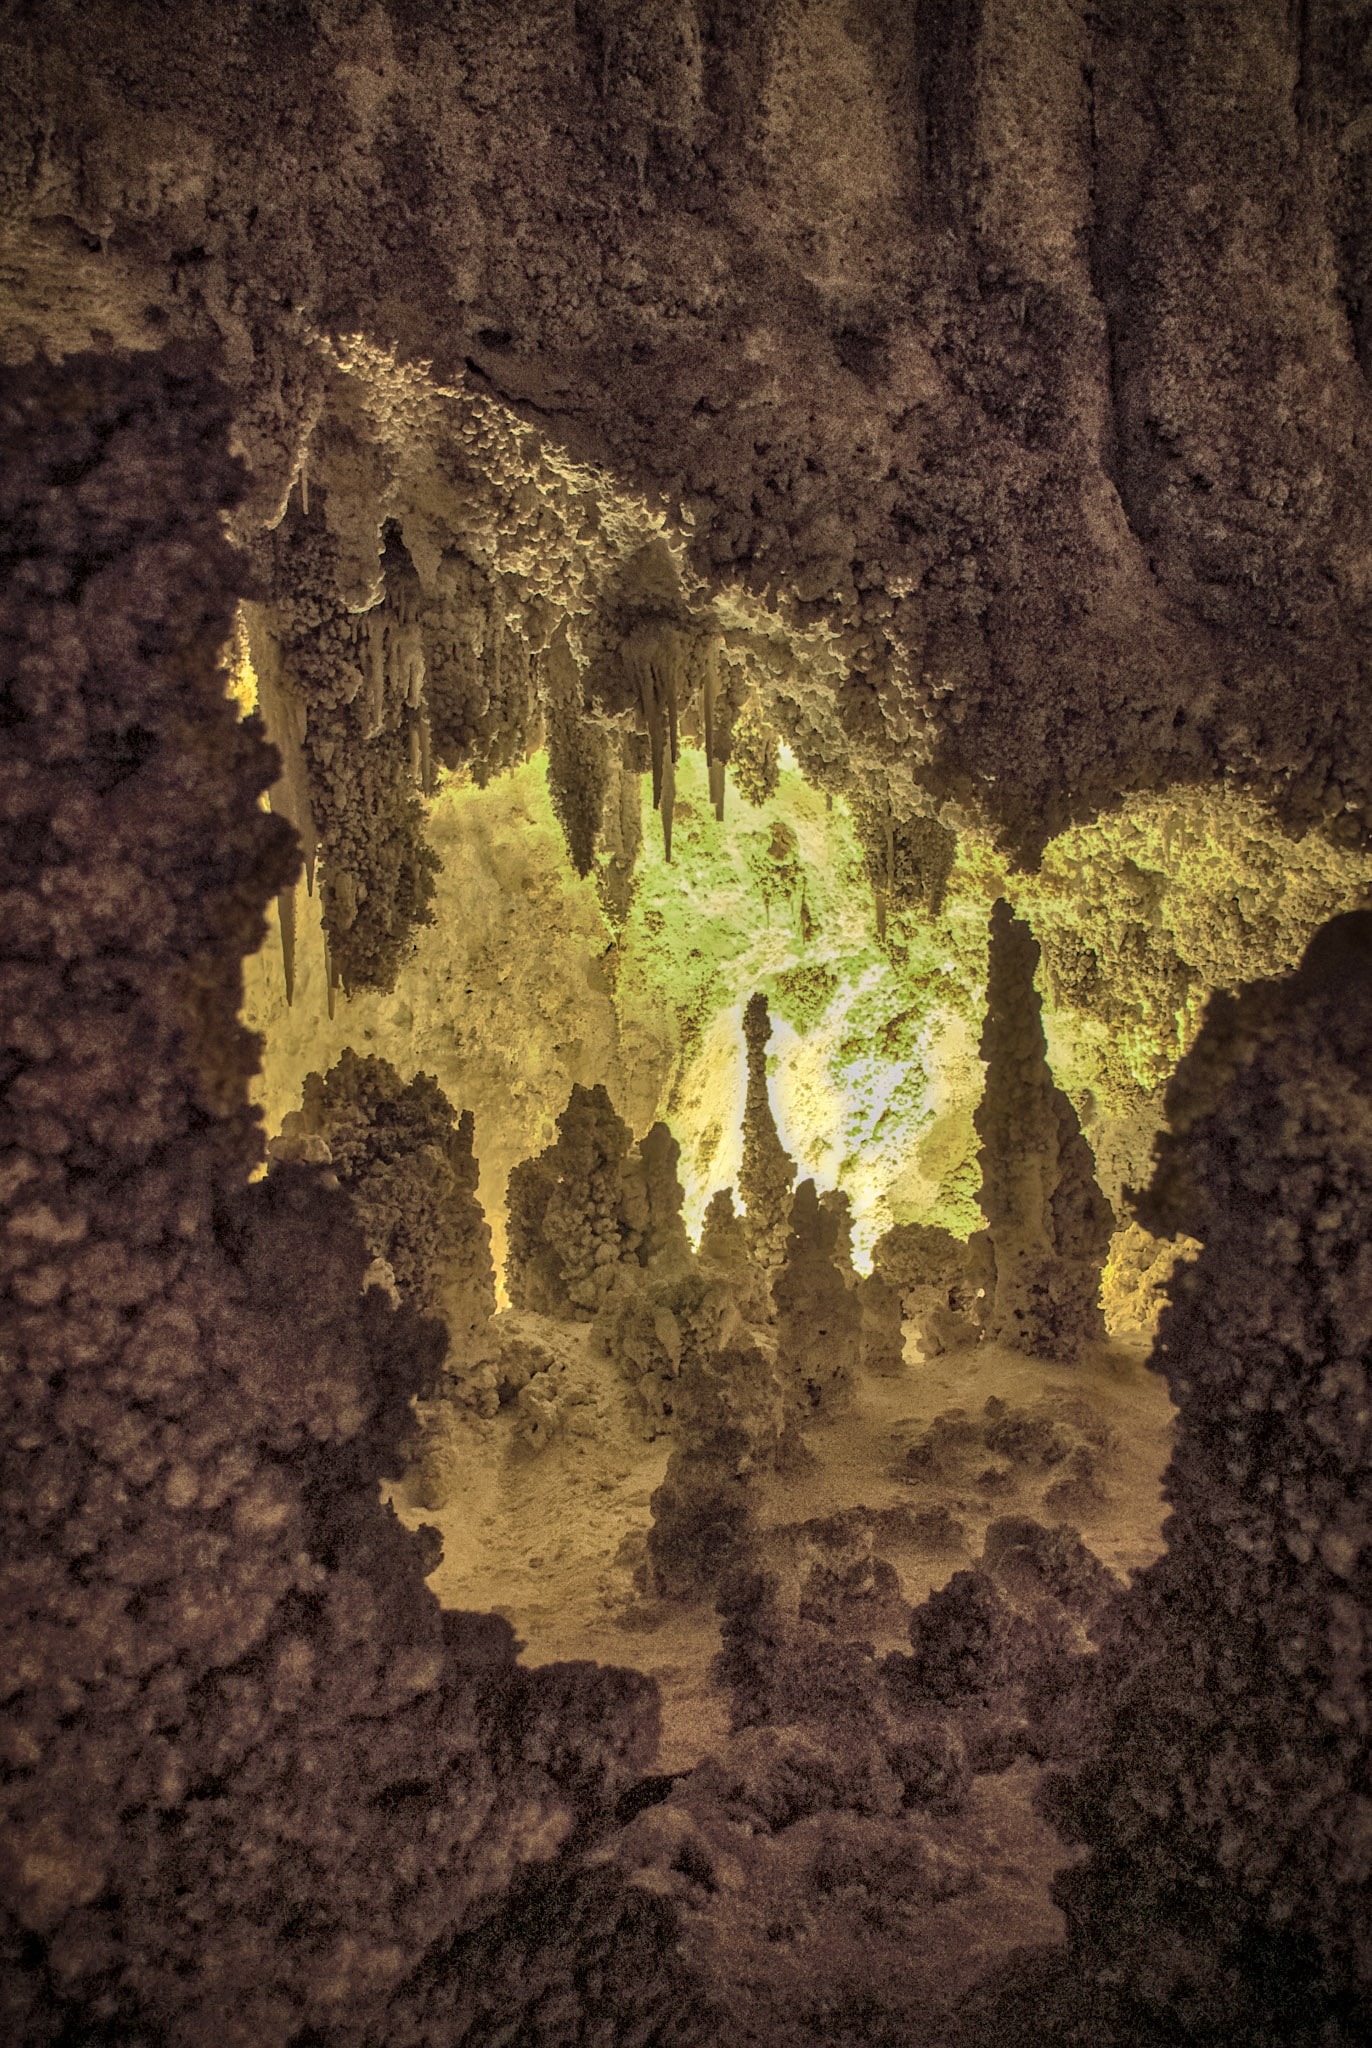 Popcorn is the main feature in an alcove in the Big Room area of Carlsbad Caverns Natioal Park in New Mexico.